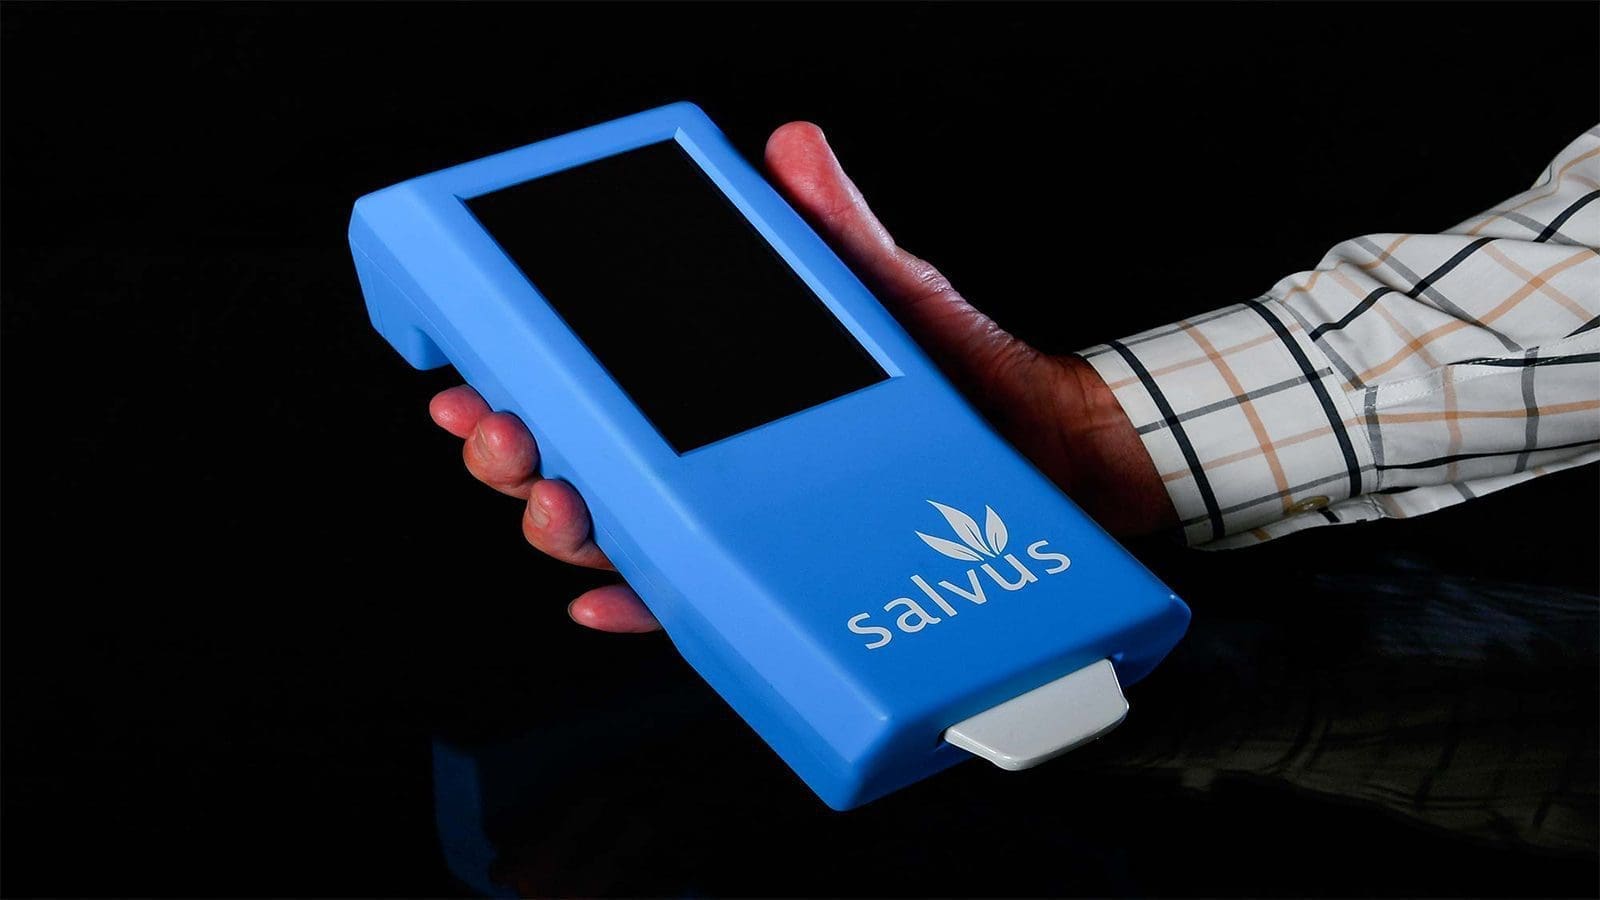 Salvus develops Interferometric-based biosensor to improve food safety in poultry industry